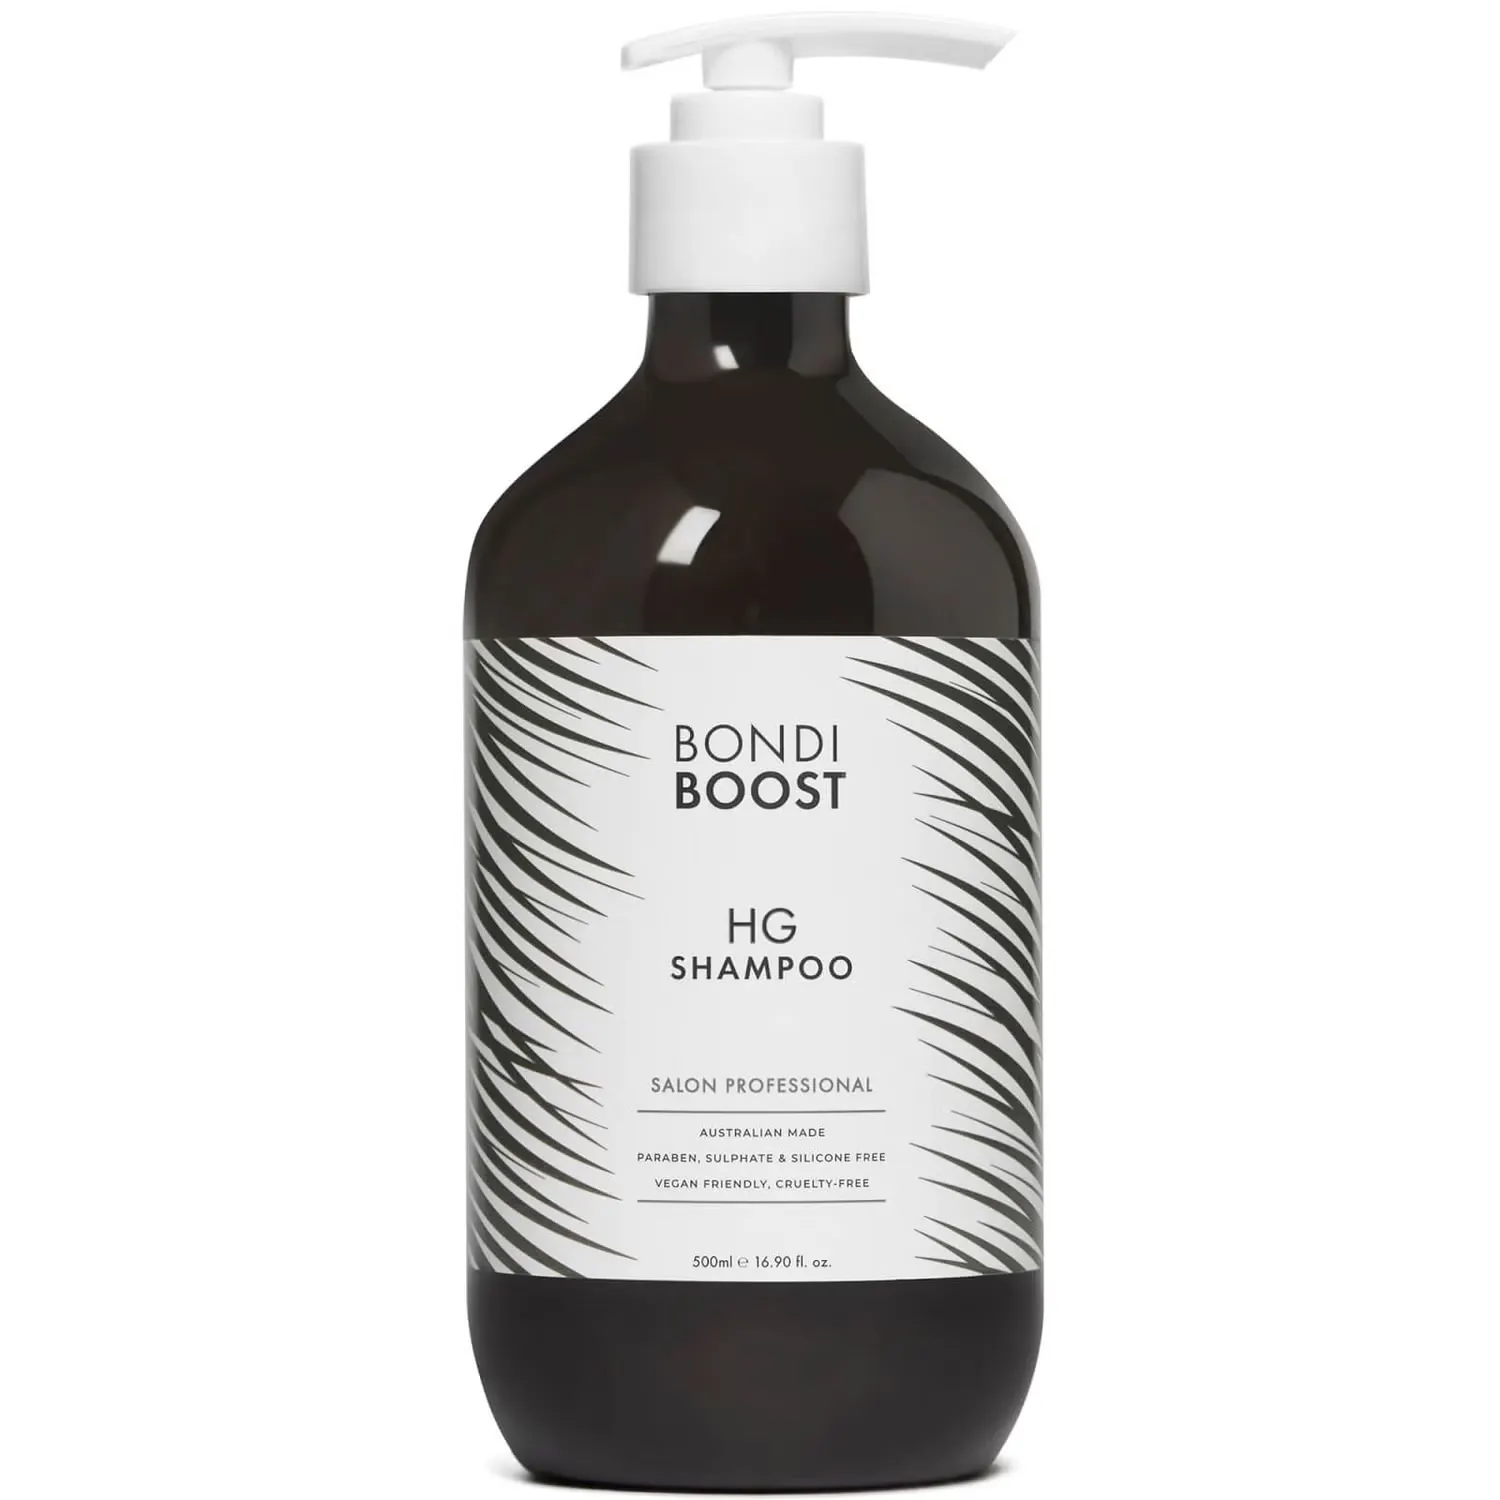 You are currently viewing Bondi Boost Shampoo Review: Is it Worth the Hype?